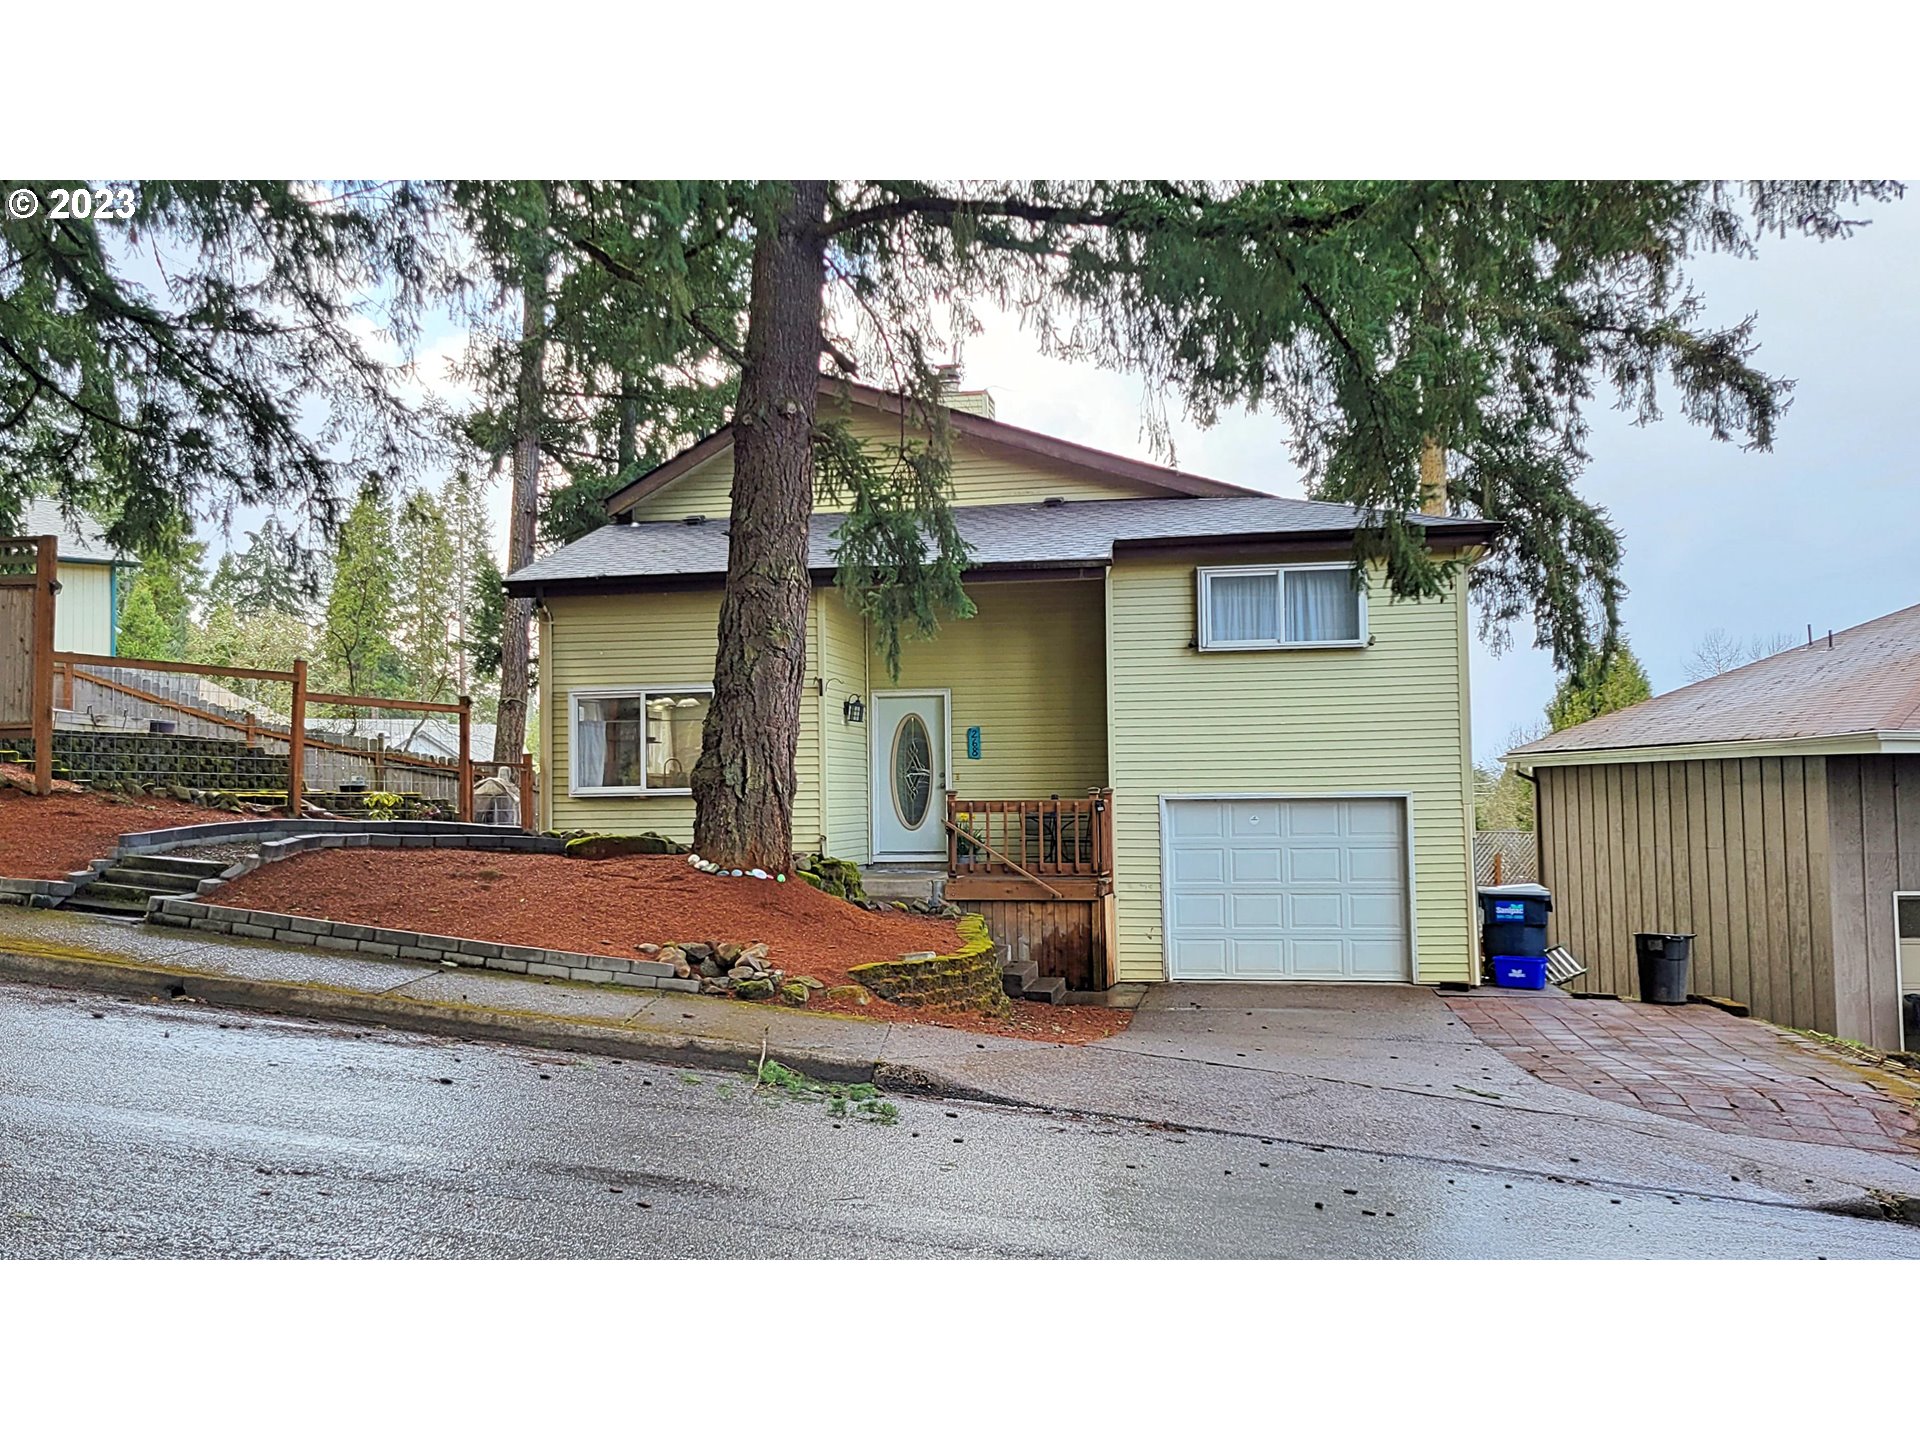 268 S 68TH PL, Springfield, OR 97478